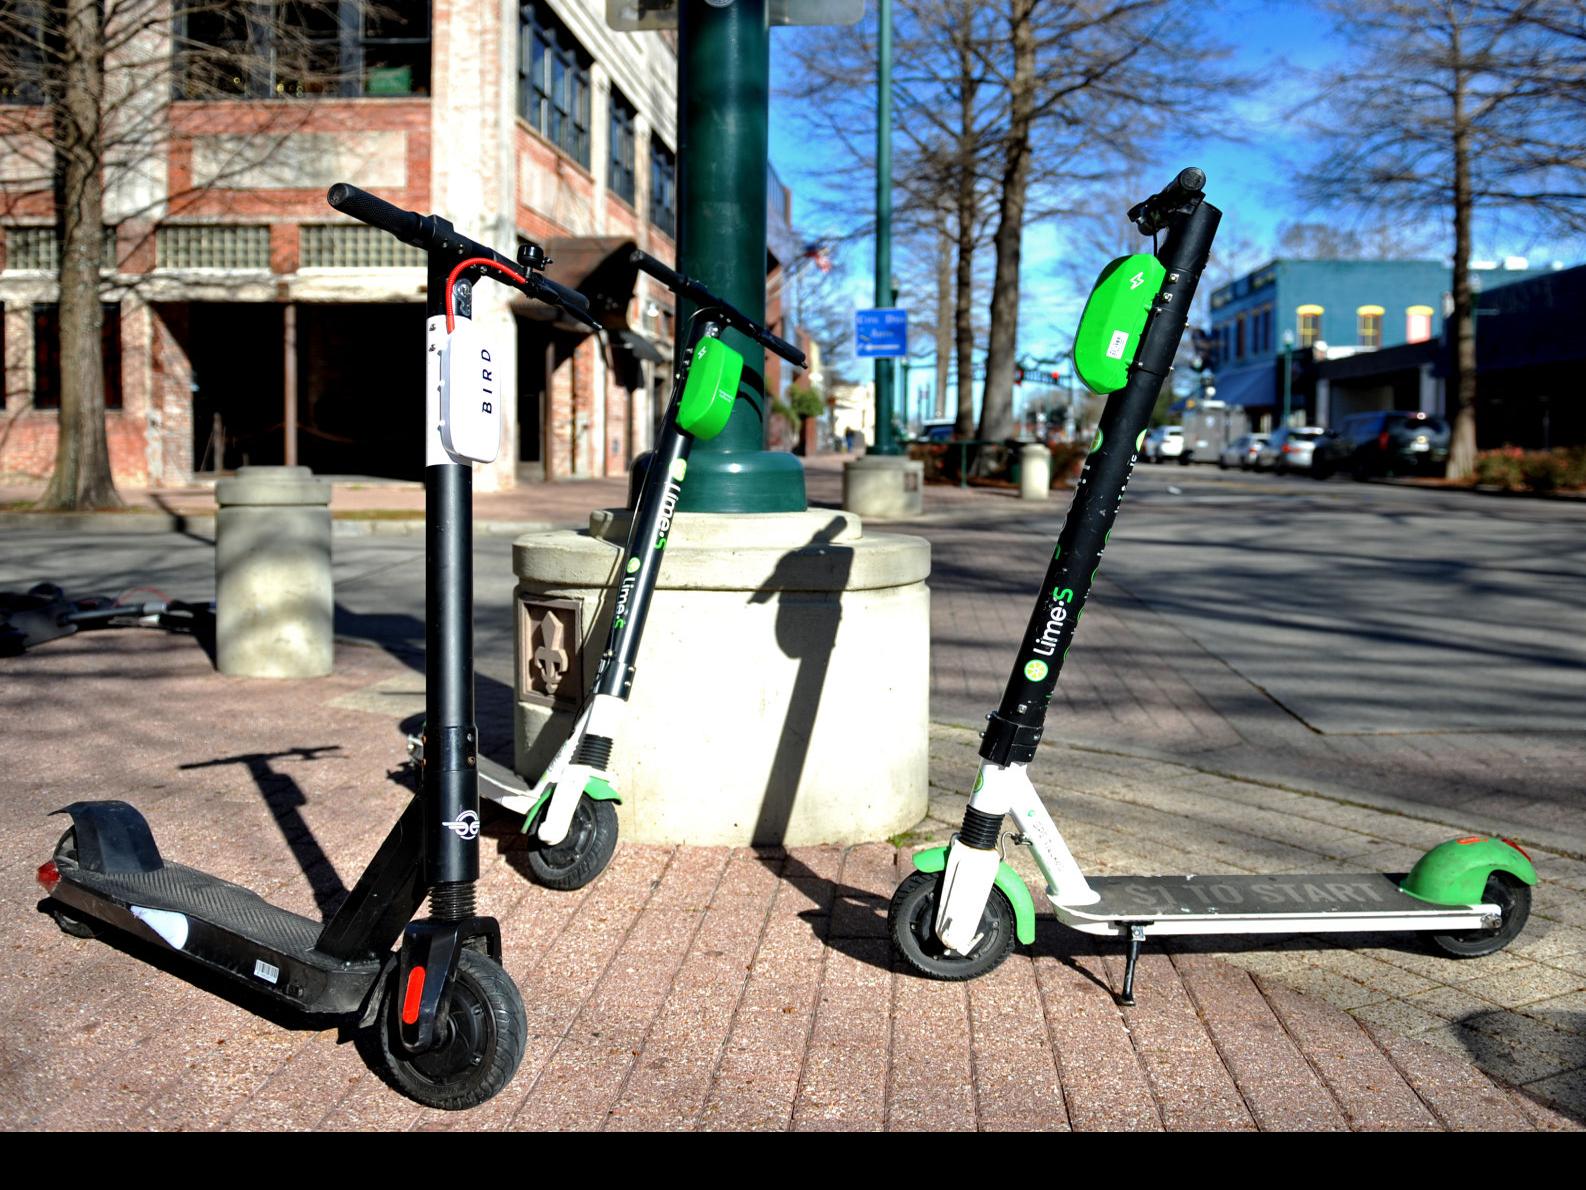 Electric scooters are returning to Lafayette after a 2-year ban, but how will they be | News | theadvocate.com